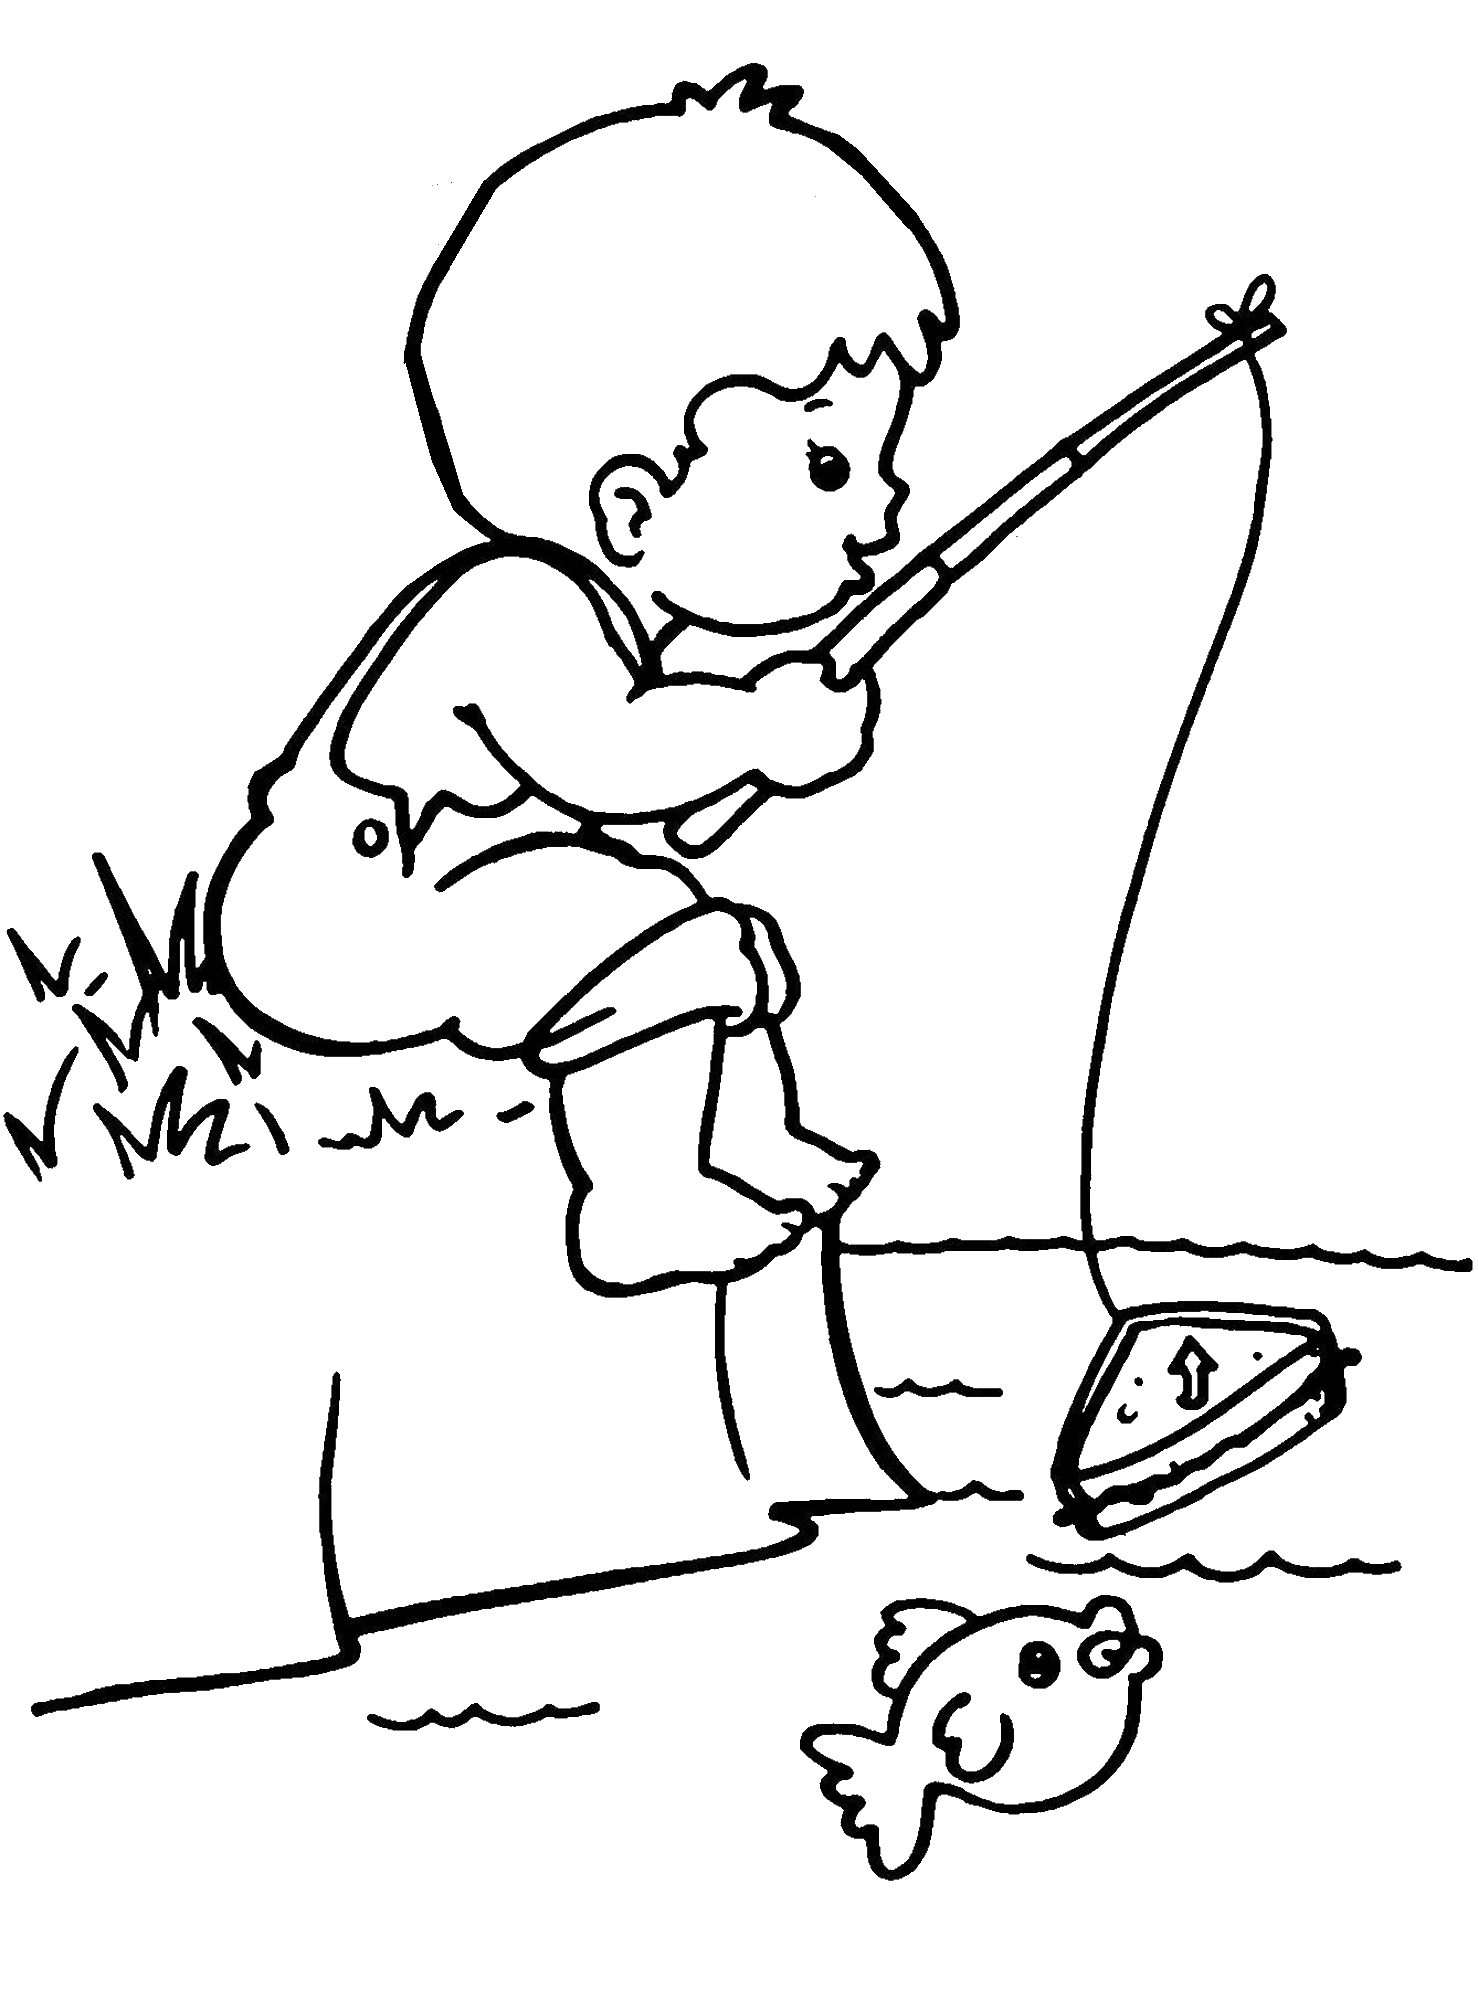 Little girl line drawing. Worm clipart fishing equipment